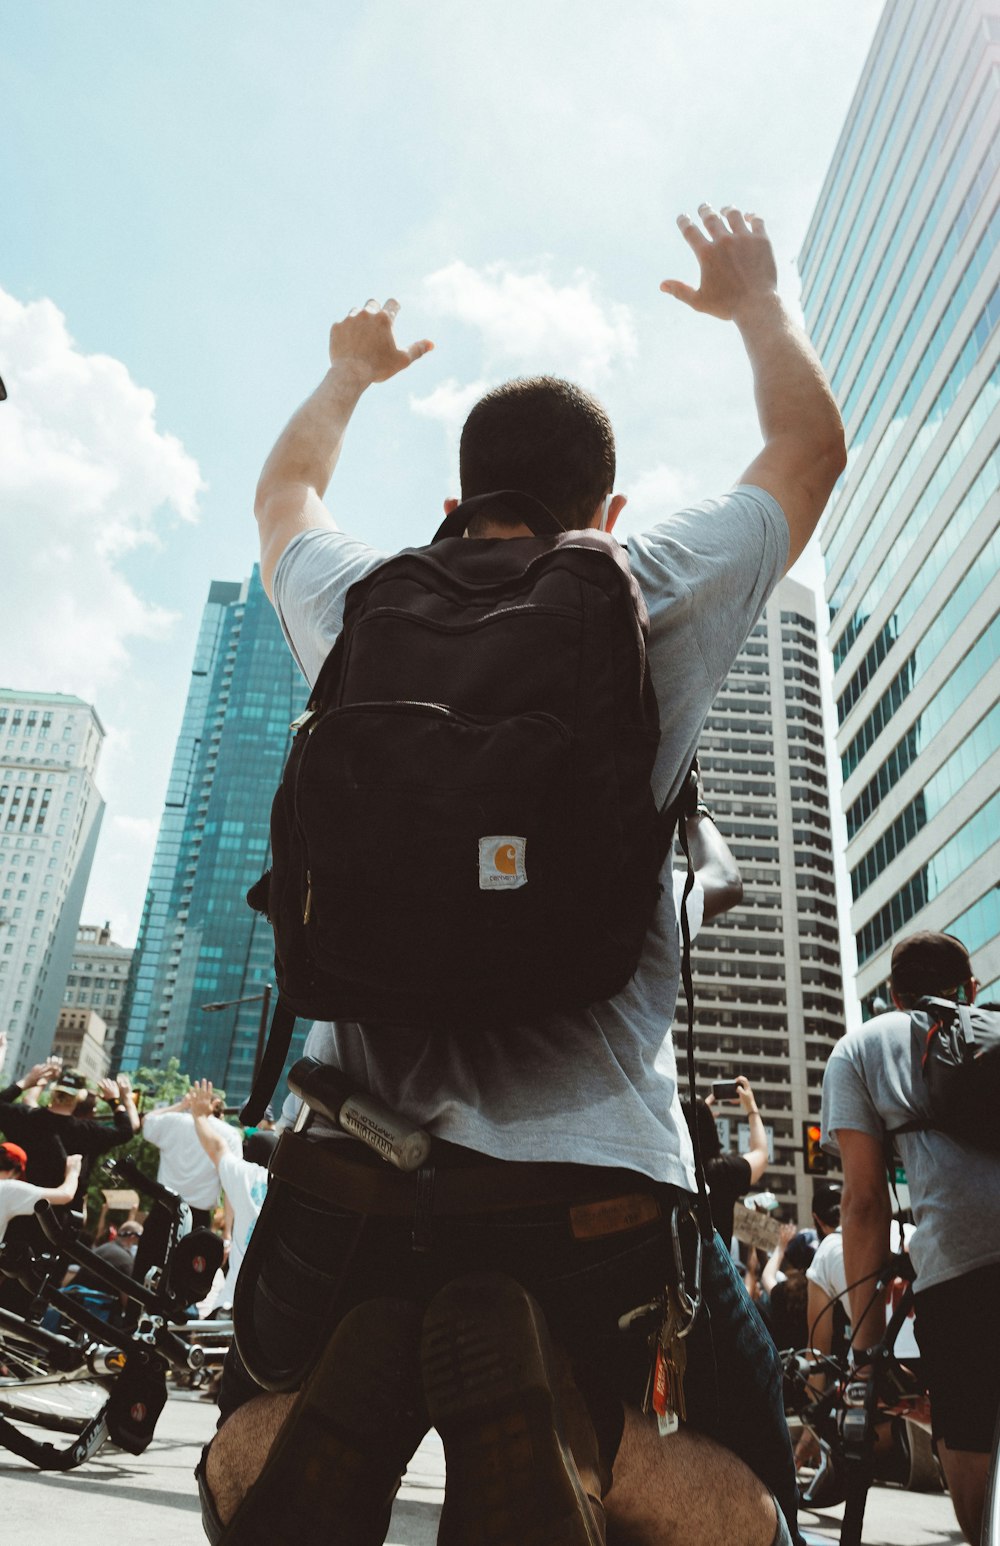 man in white shirt and black backpack raising his hands